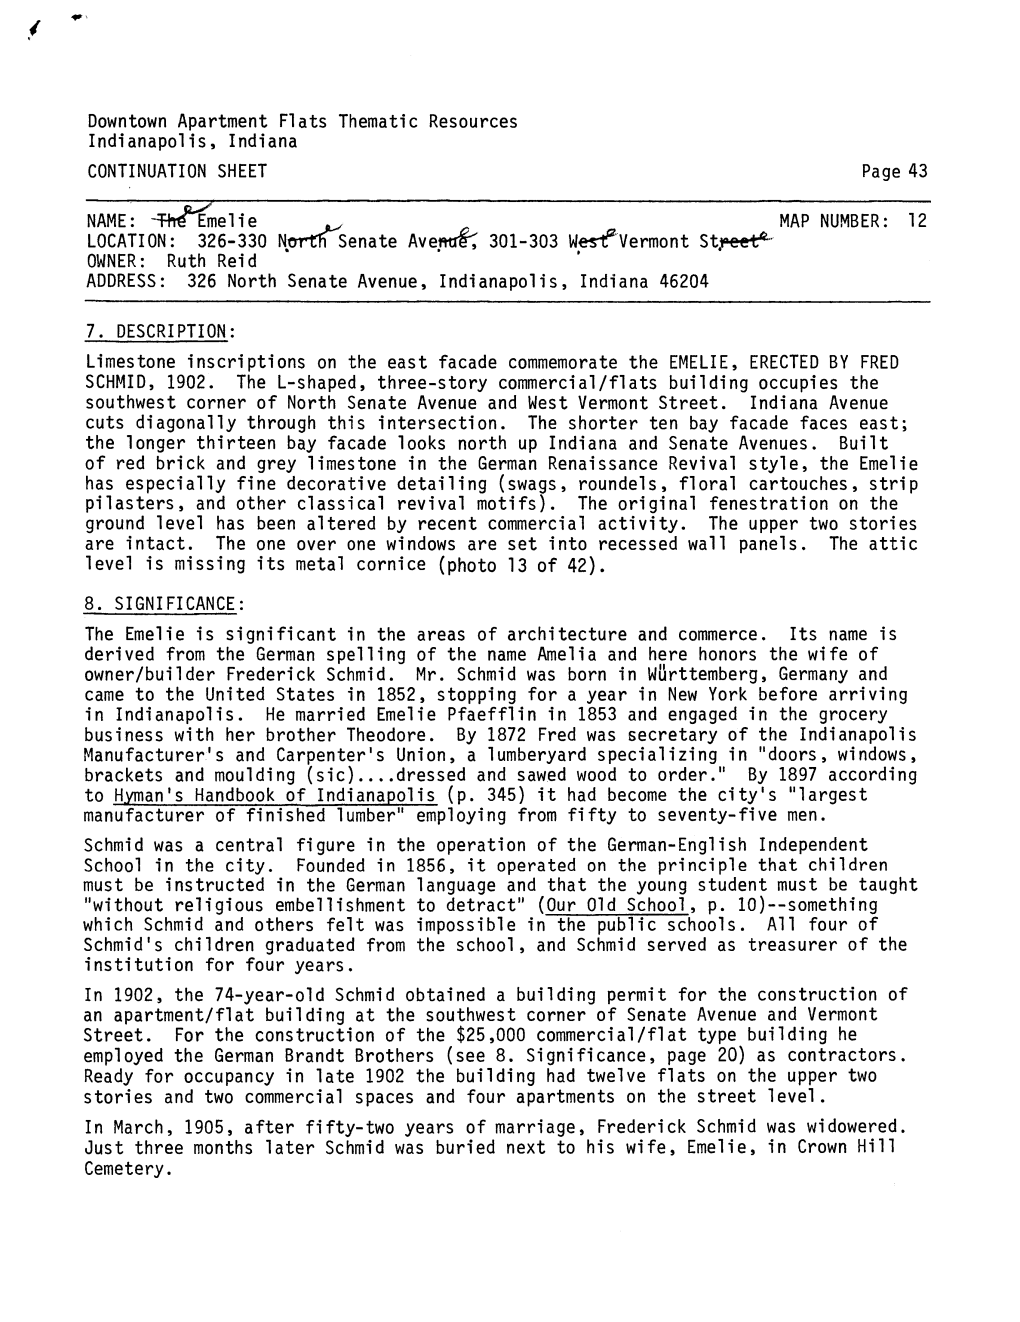 Downtown Apartment Flats Thematic Resources Indianapolis, Indiana CONTINUATION SHEET Page 43